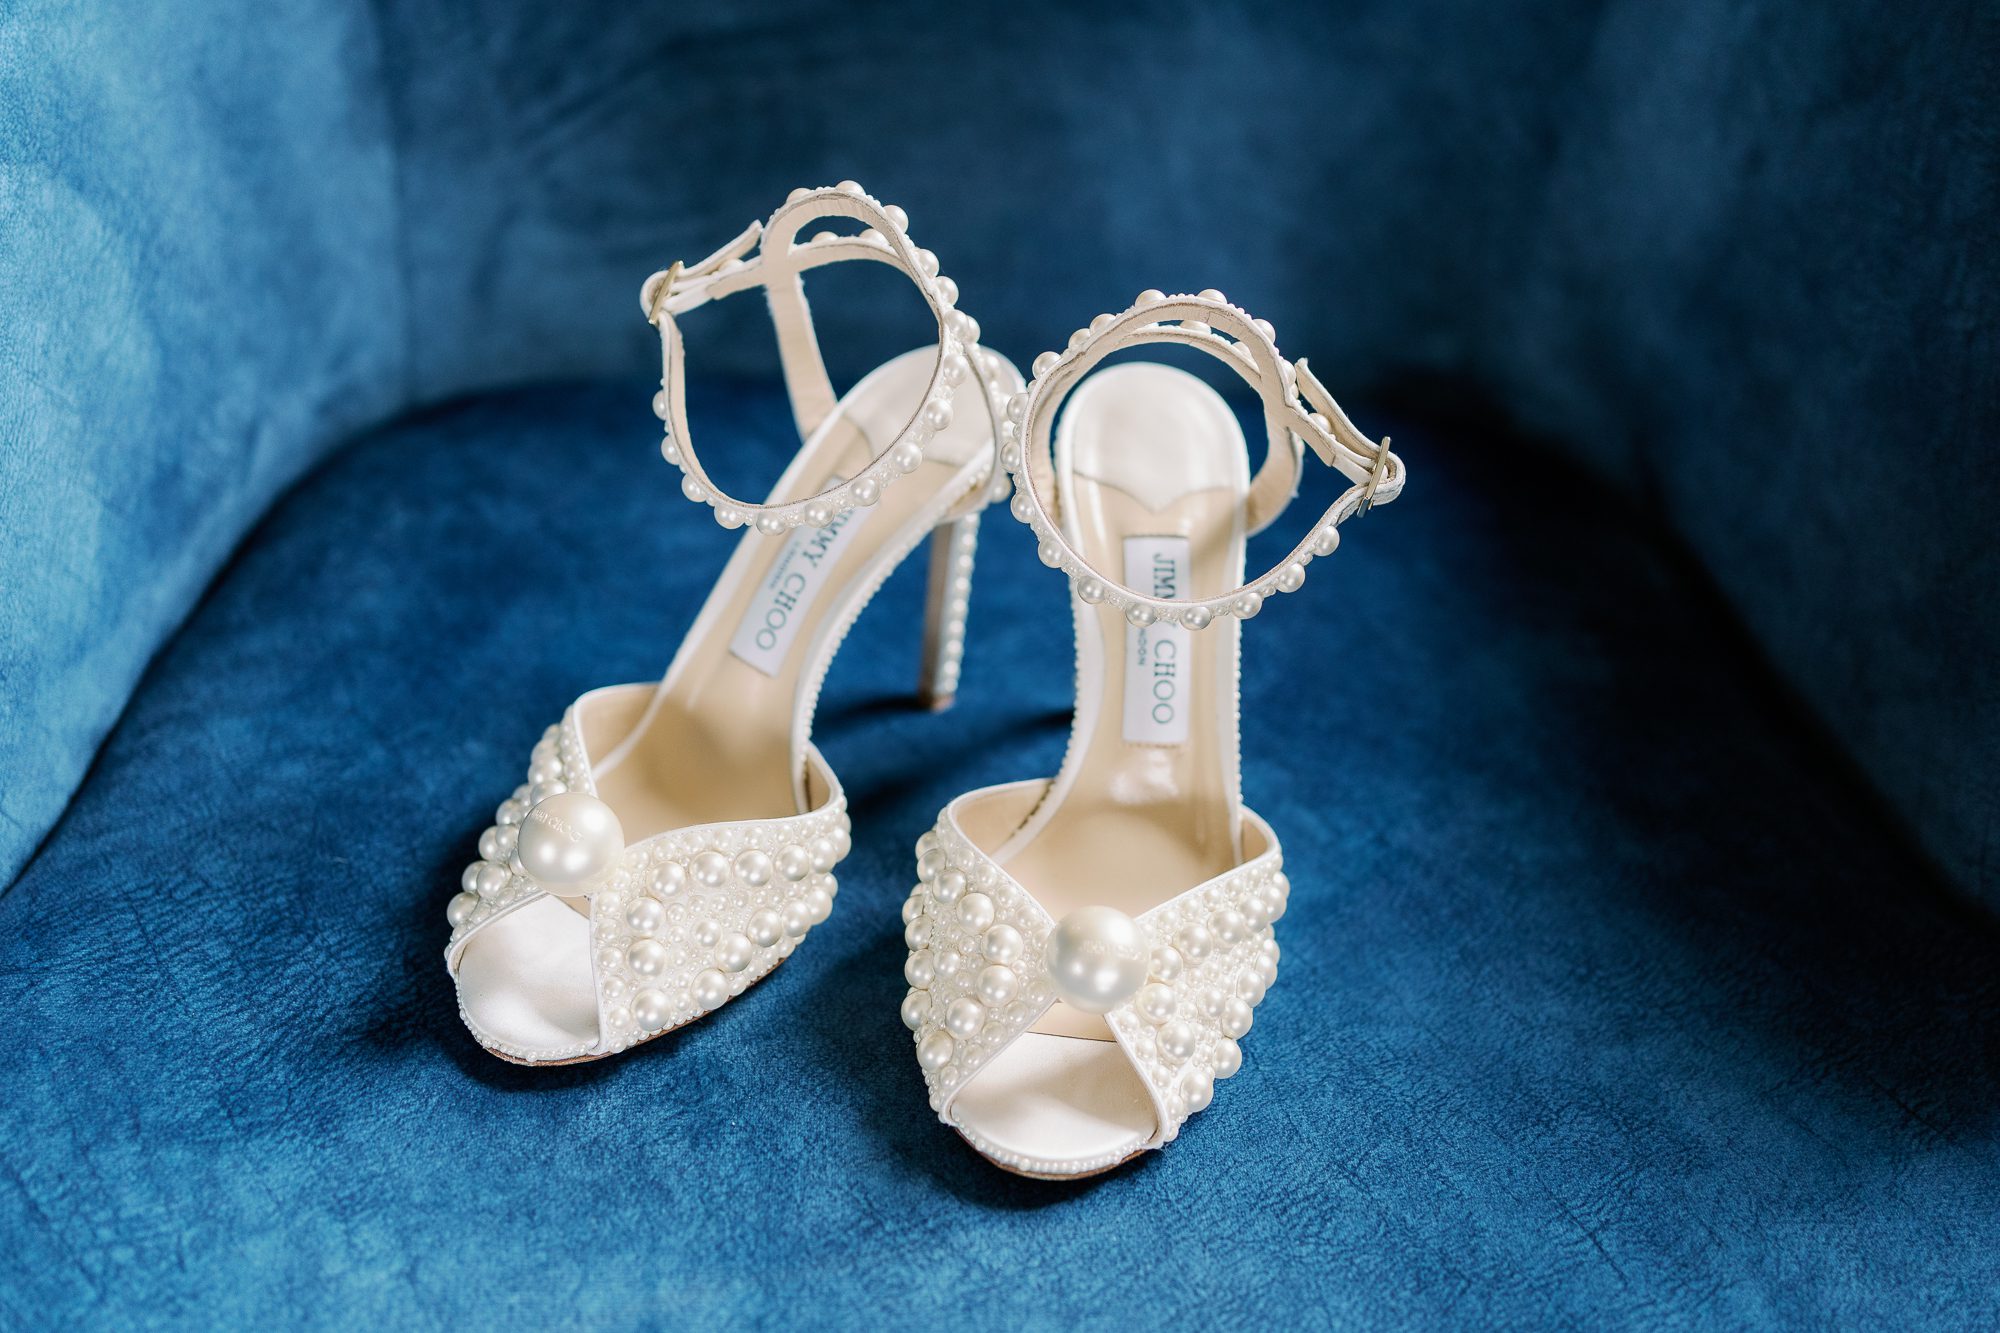 Jimmy Choo SACORA 100 White Satin Sandals with All Over Pearls.